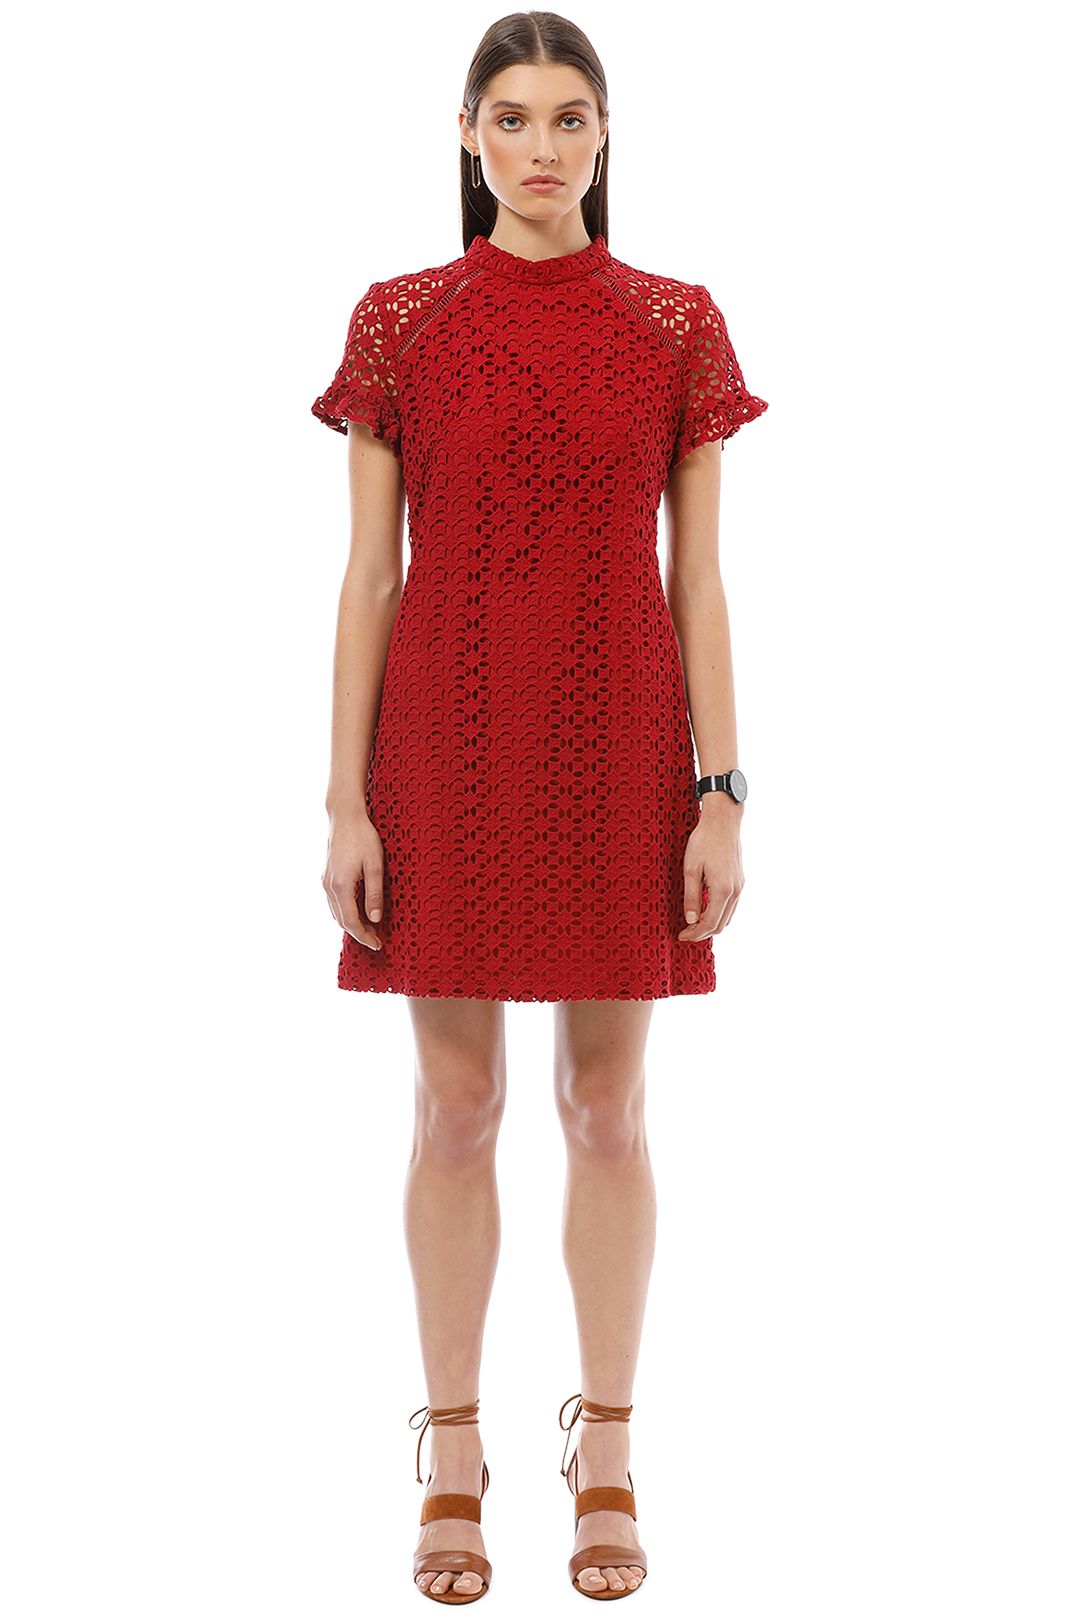 Cue - Lace Shift Dress - Red - Front